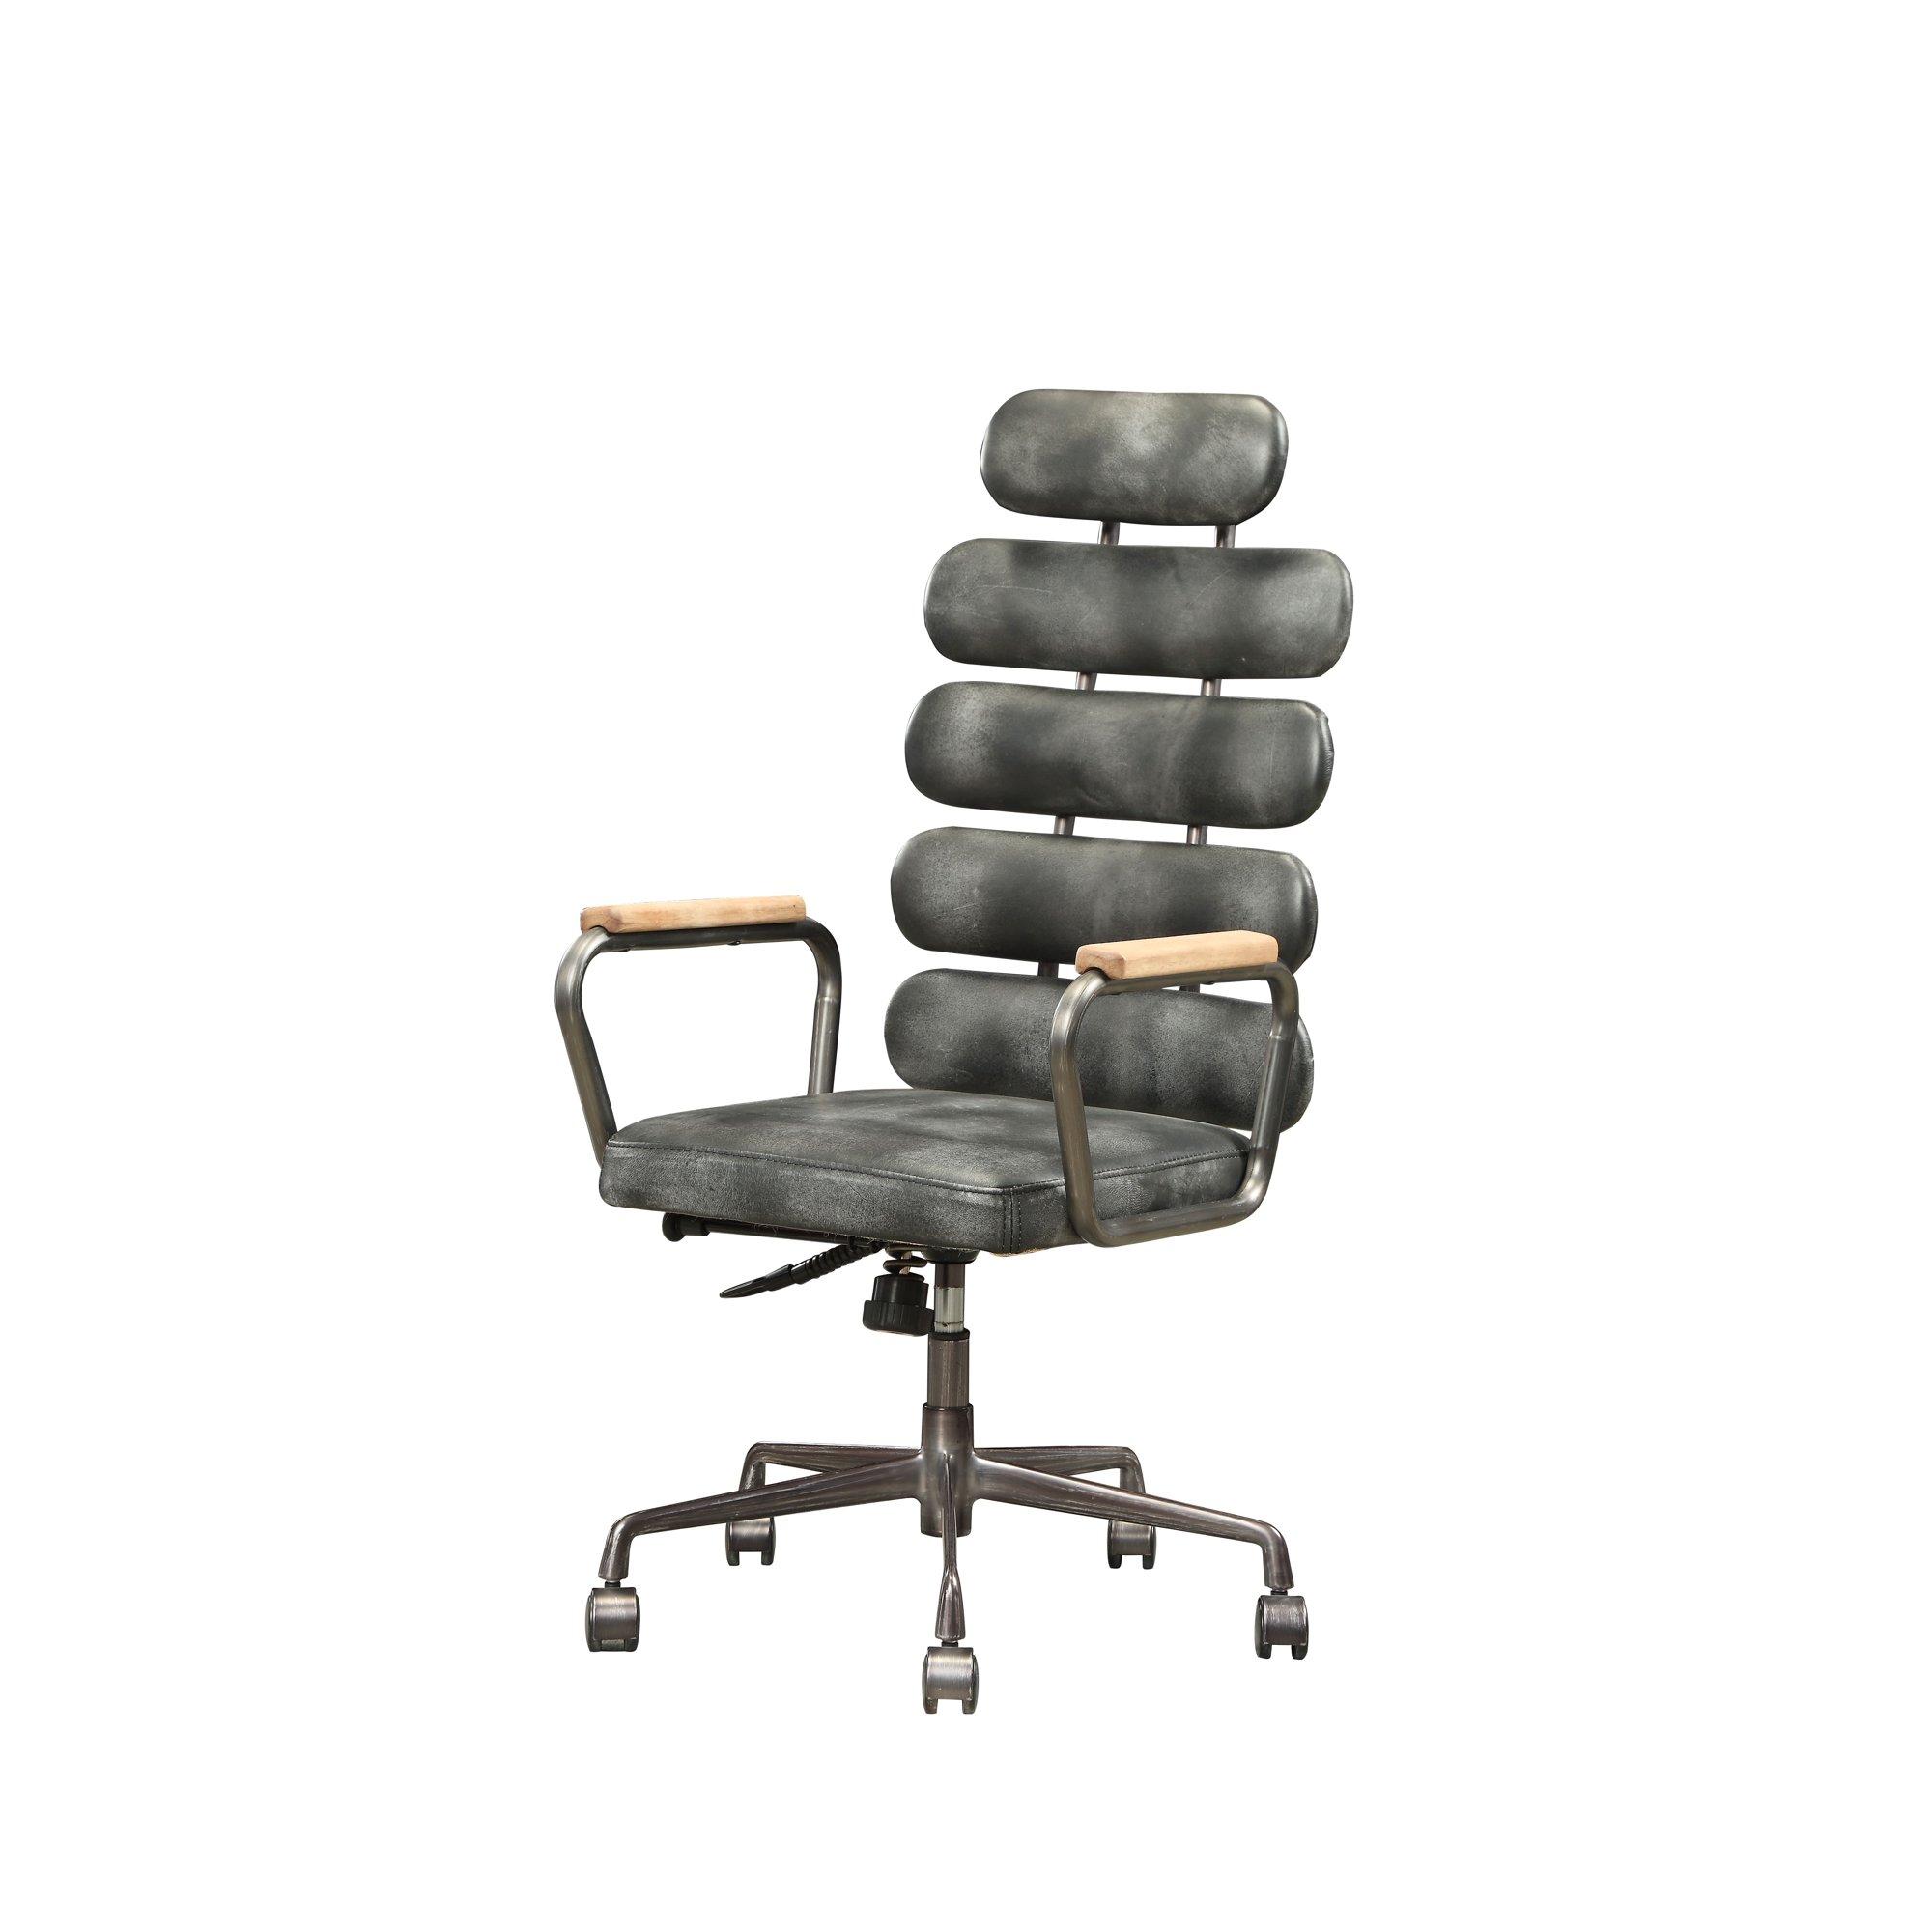 Modern Executive Office Chair Calan 92107 in Gray Top grain leather